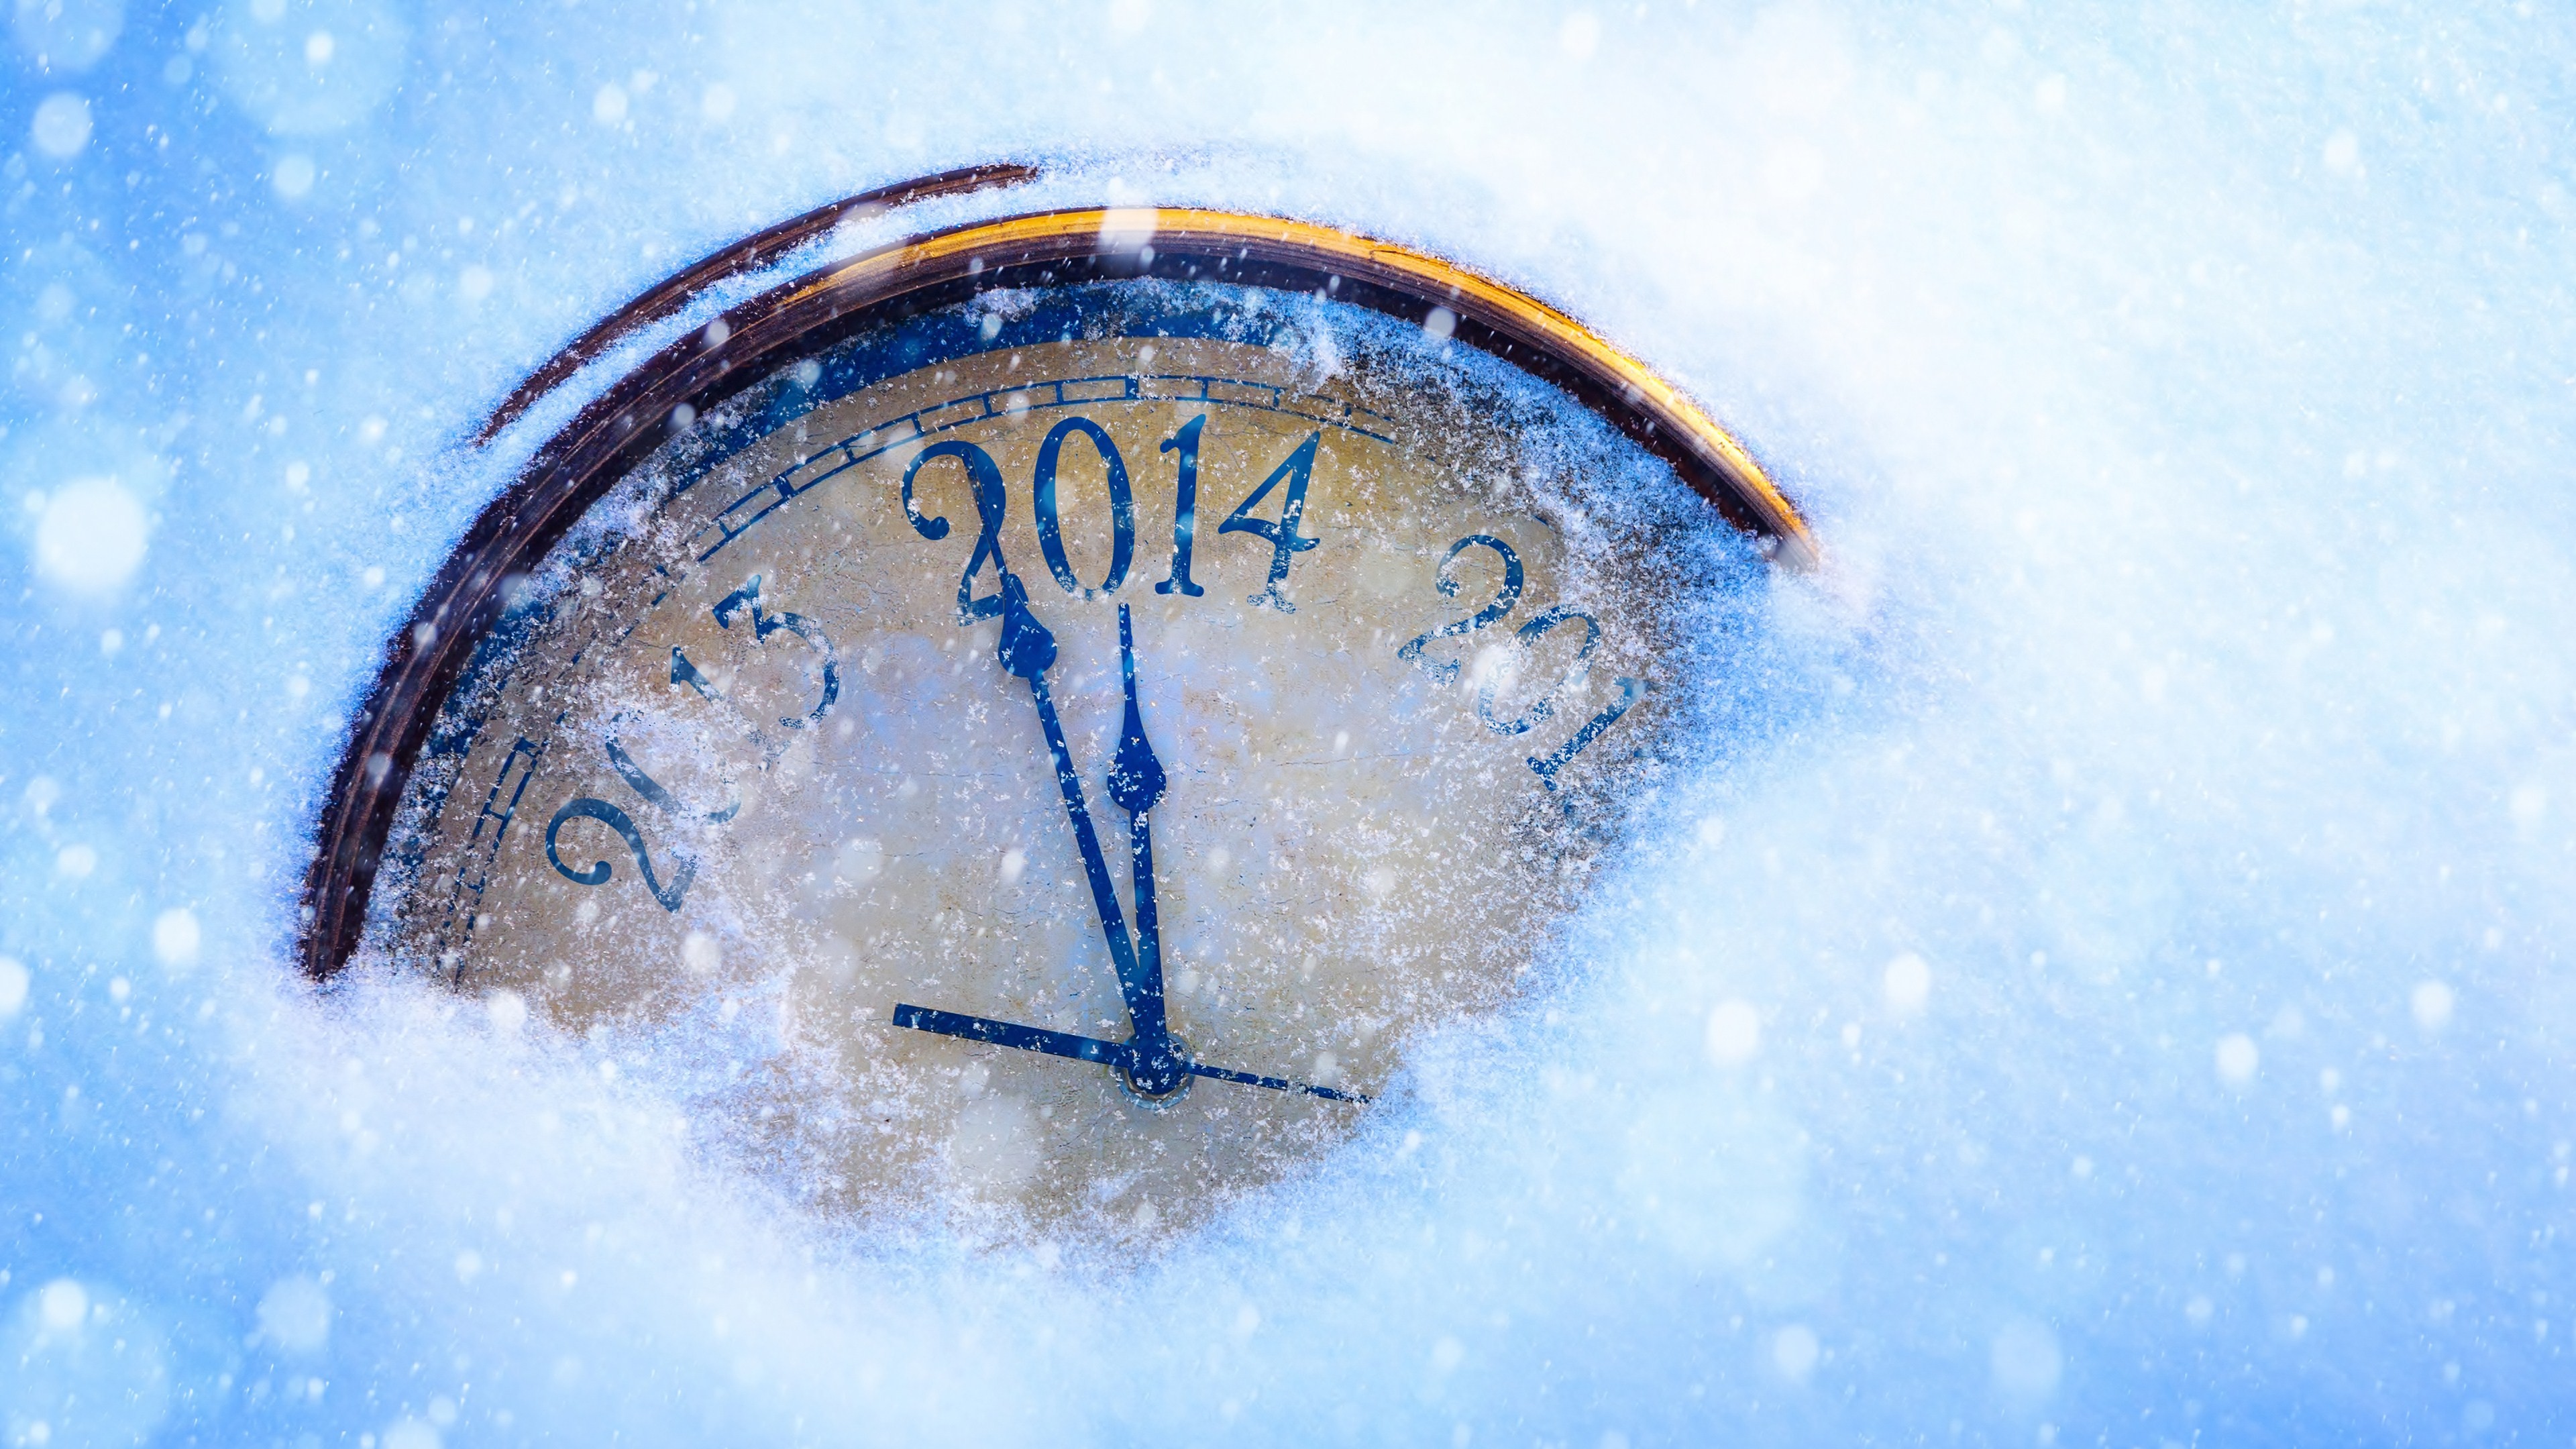 General 3840x2160 photography clocks 2014 (Year) numbers snow snowing macro time